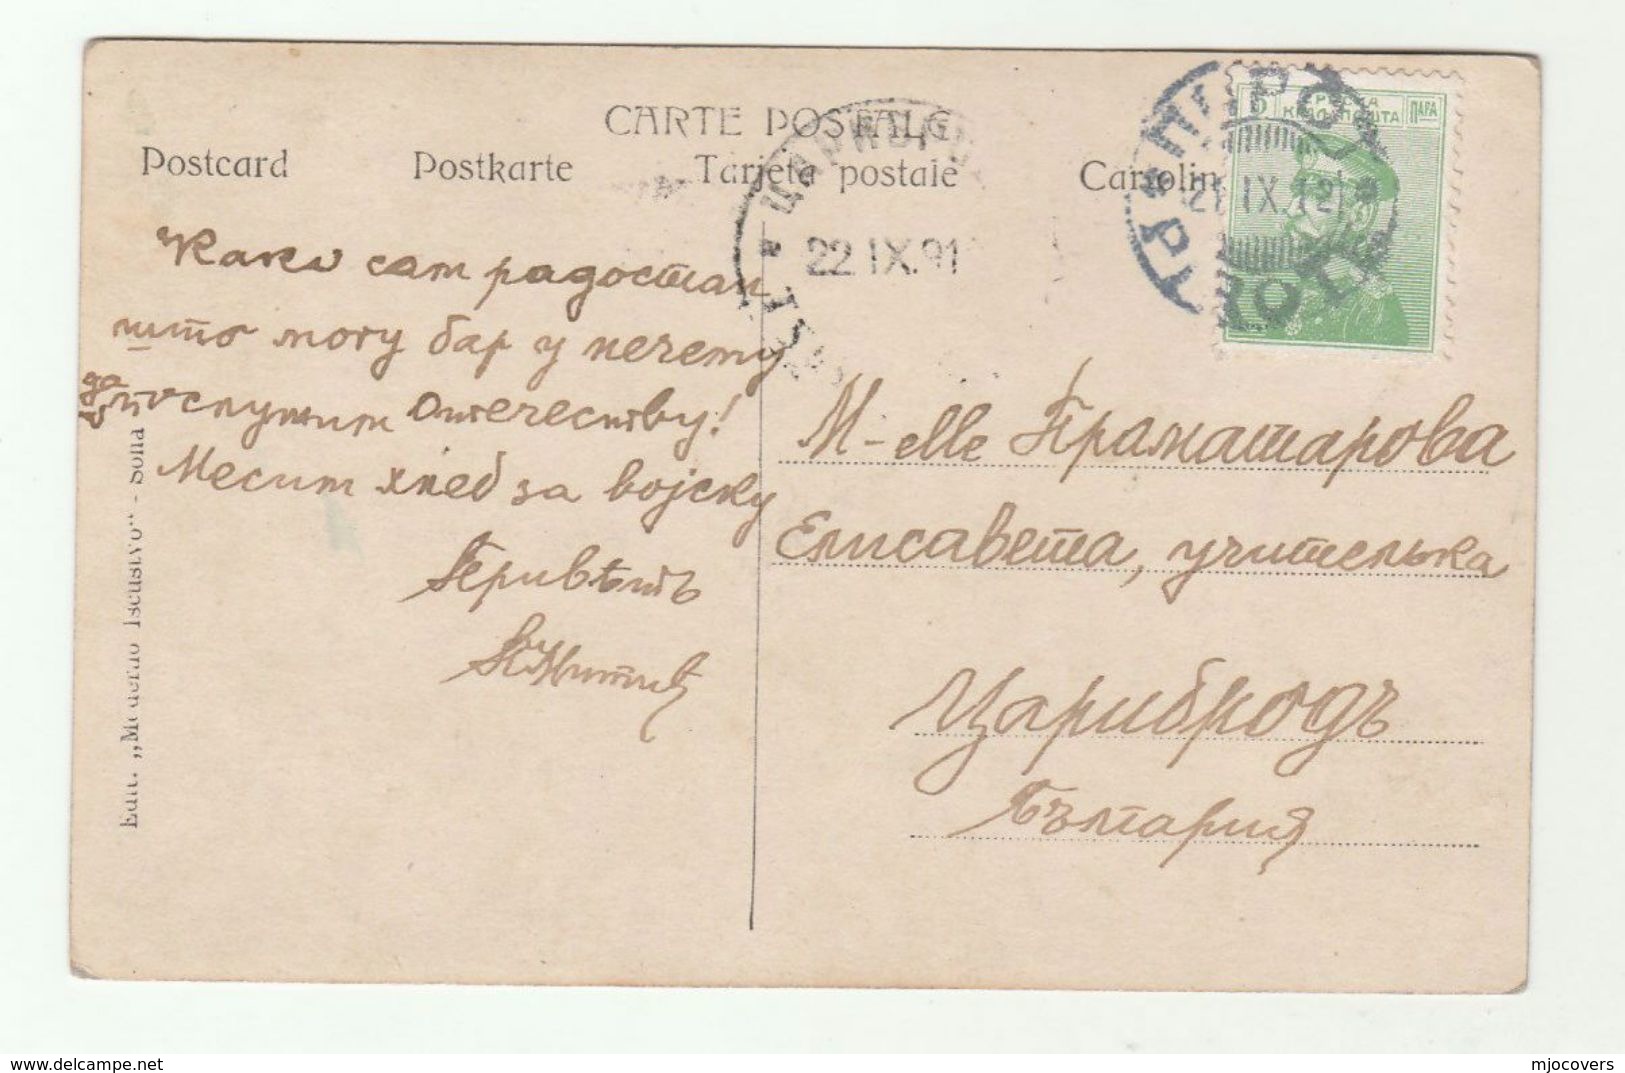 1921 PIROT To CARIBROD Serbia TOLSTOY POSTCARD (Tolstoy,  On Way To Infinity) Stamps Cover - Serbia